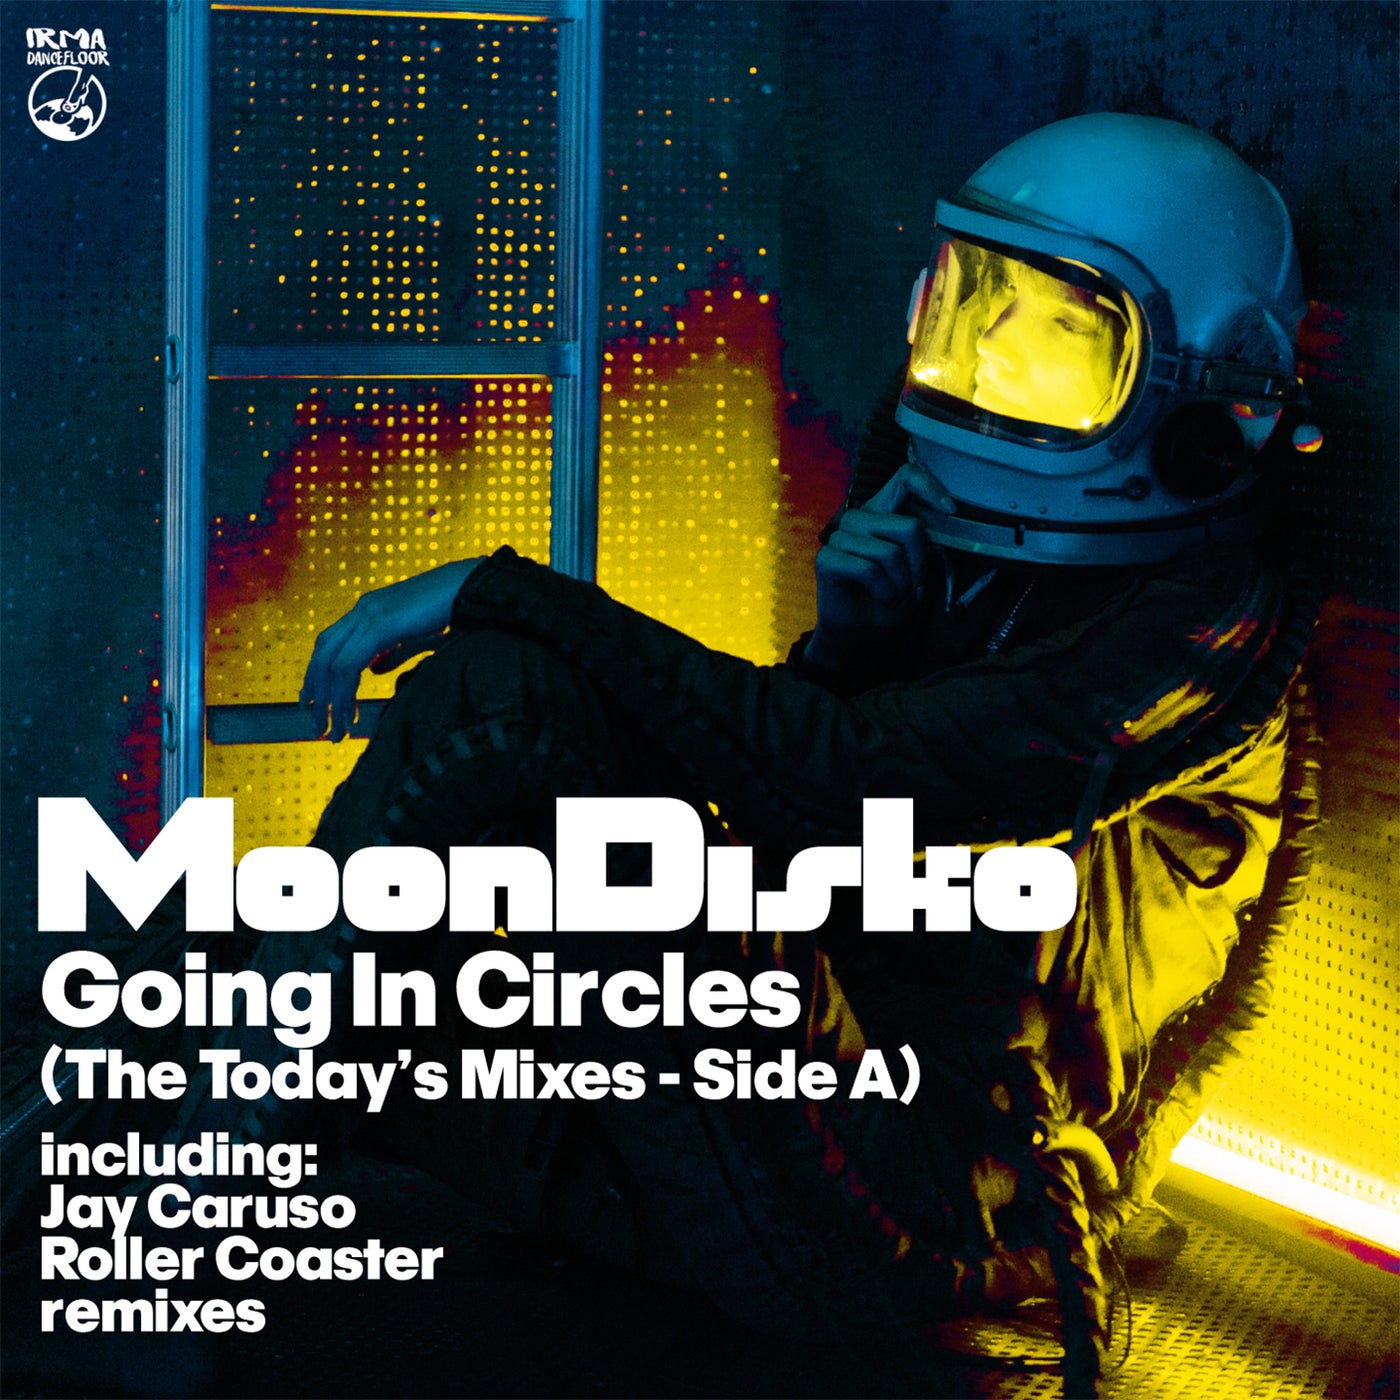 Going In Circles - The Today's Mixes  (Side A)